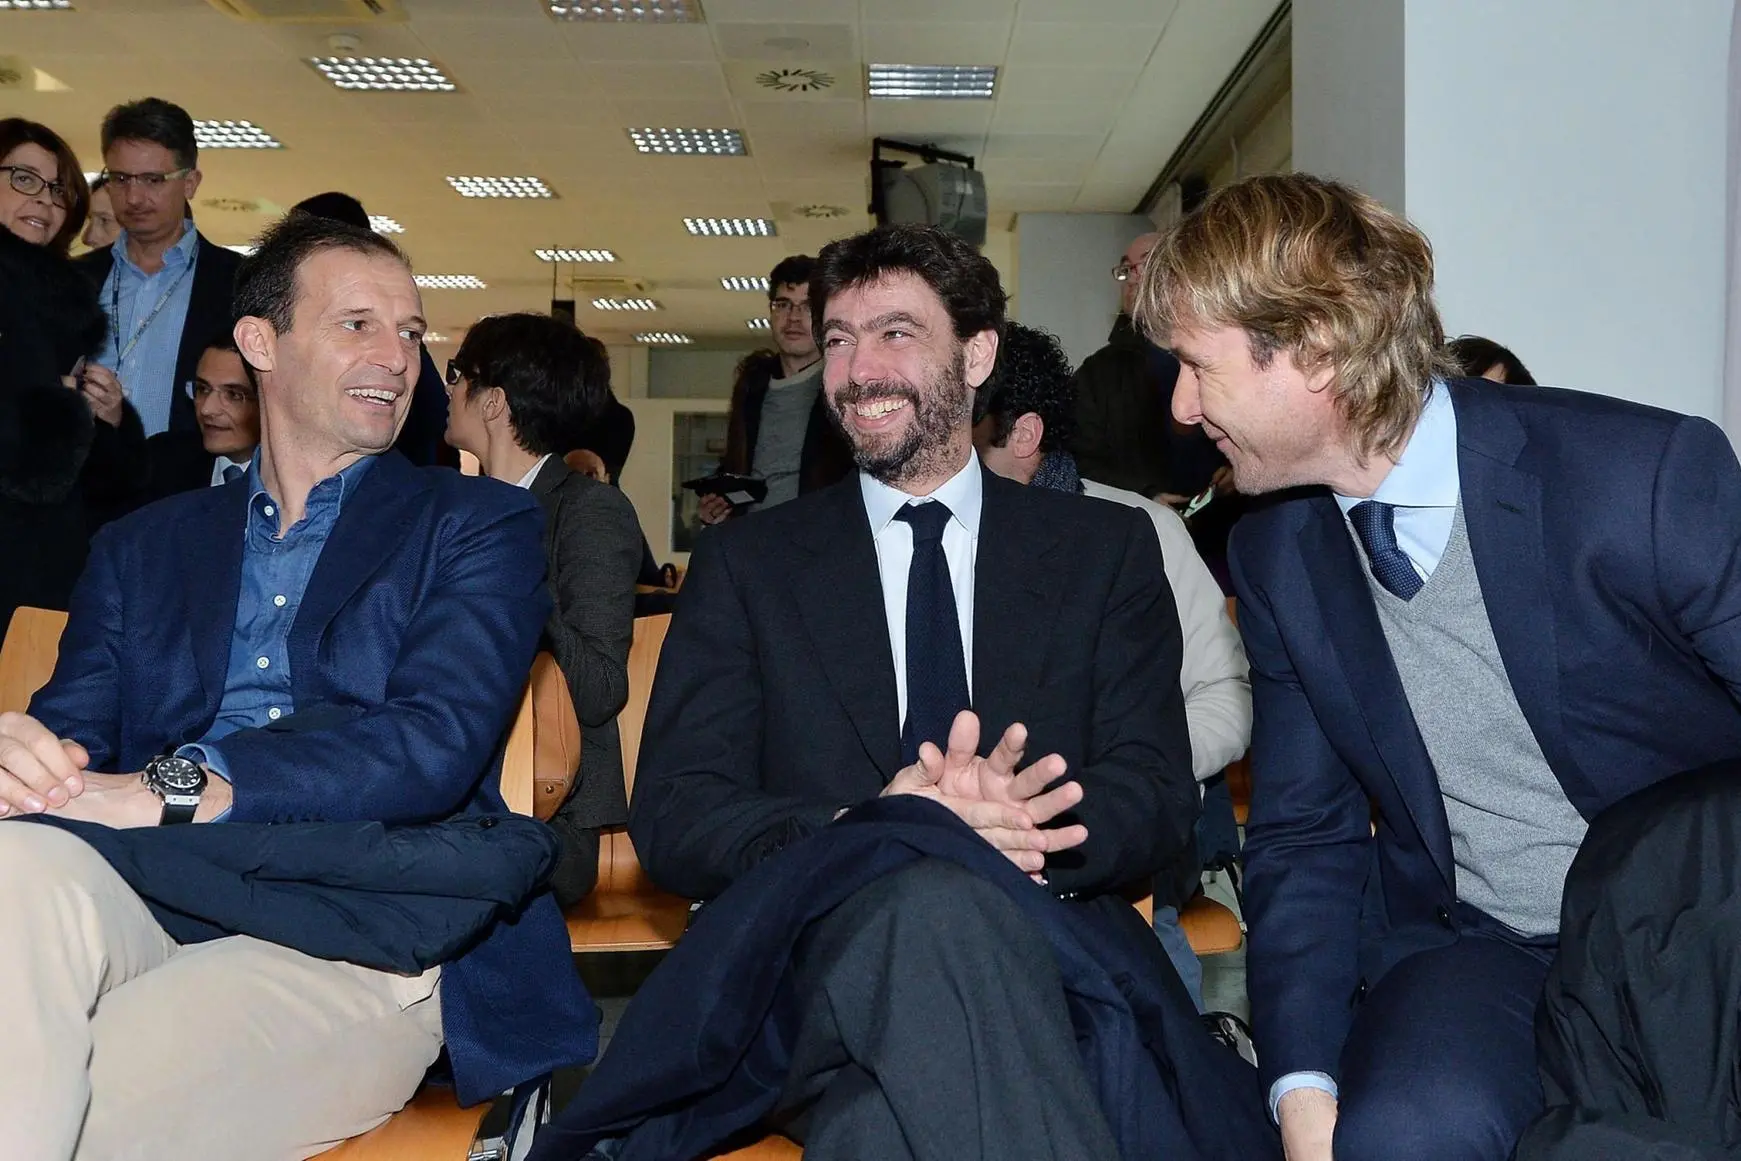 From left to right Juventus' head coach Massimiliano Allegri, Juventus' president Andrea Agnelli and Juventus' executive vice president Pavel Nedved on the occasion of the presentation of a charity event called 'Partita del Cuore', Turin, 16 February 2016. ANSA/ ALESSANDRO DI MARCO